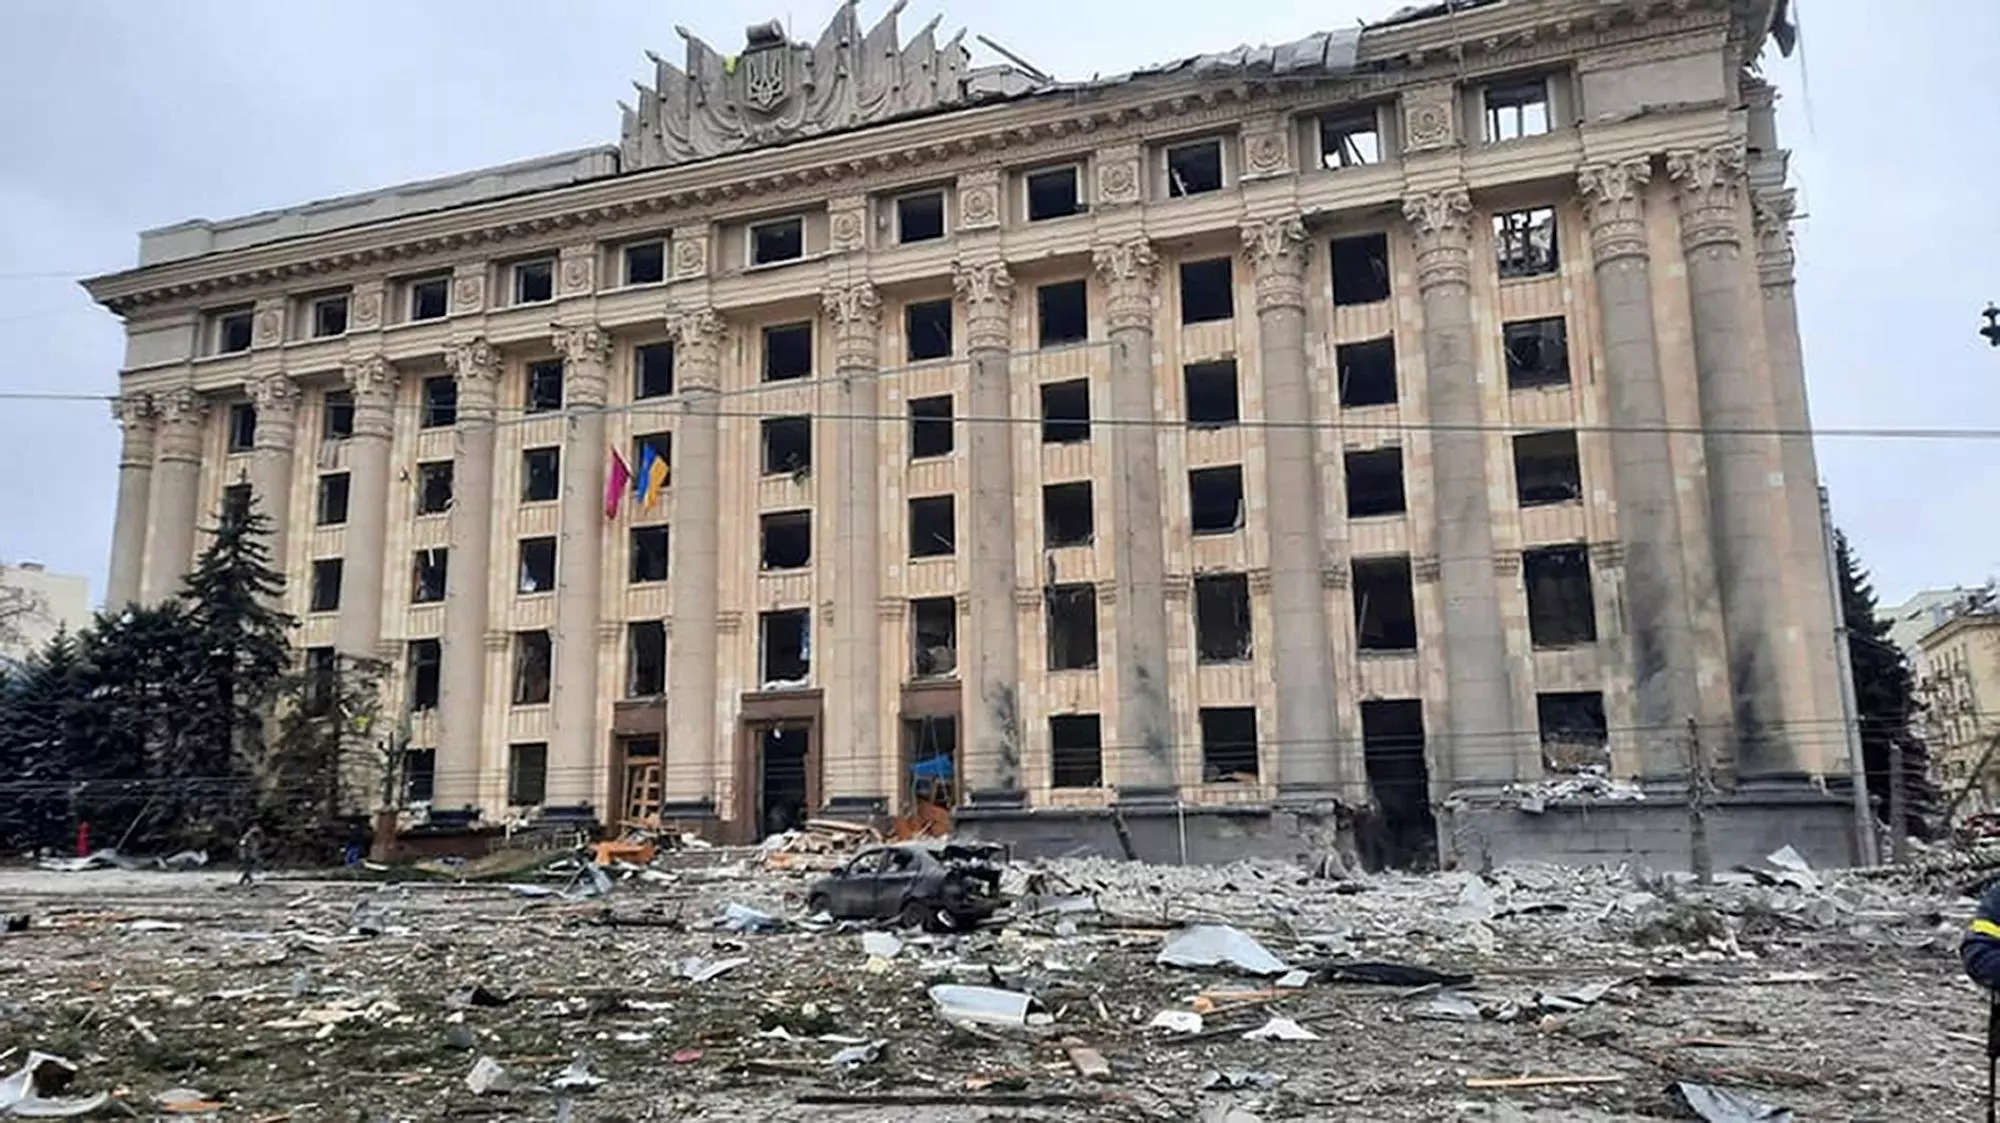 The damaged City Hall building in Kharkiv, Ukraine, Tuesday, March 1, 2022